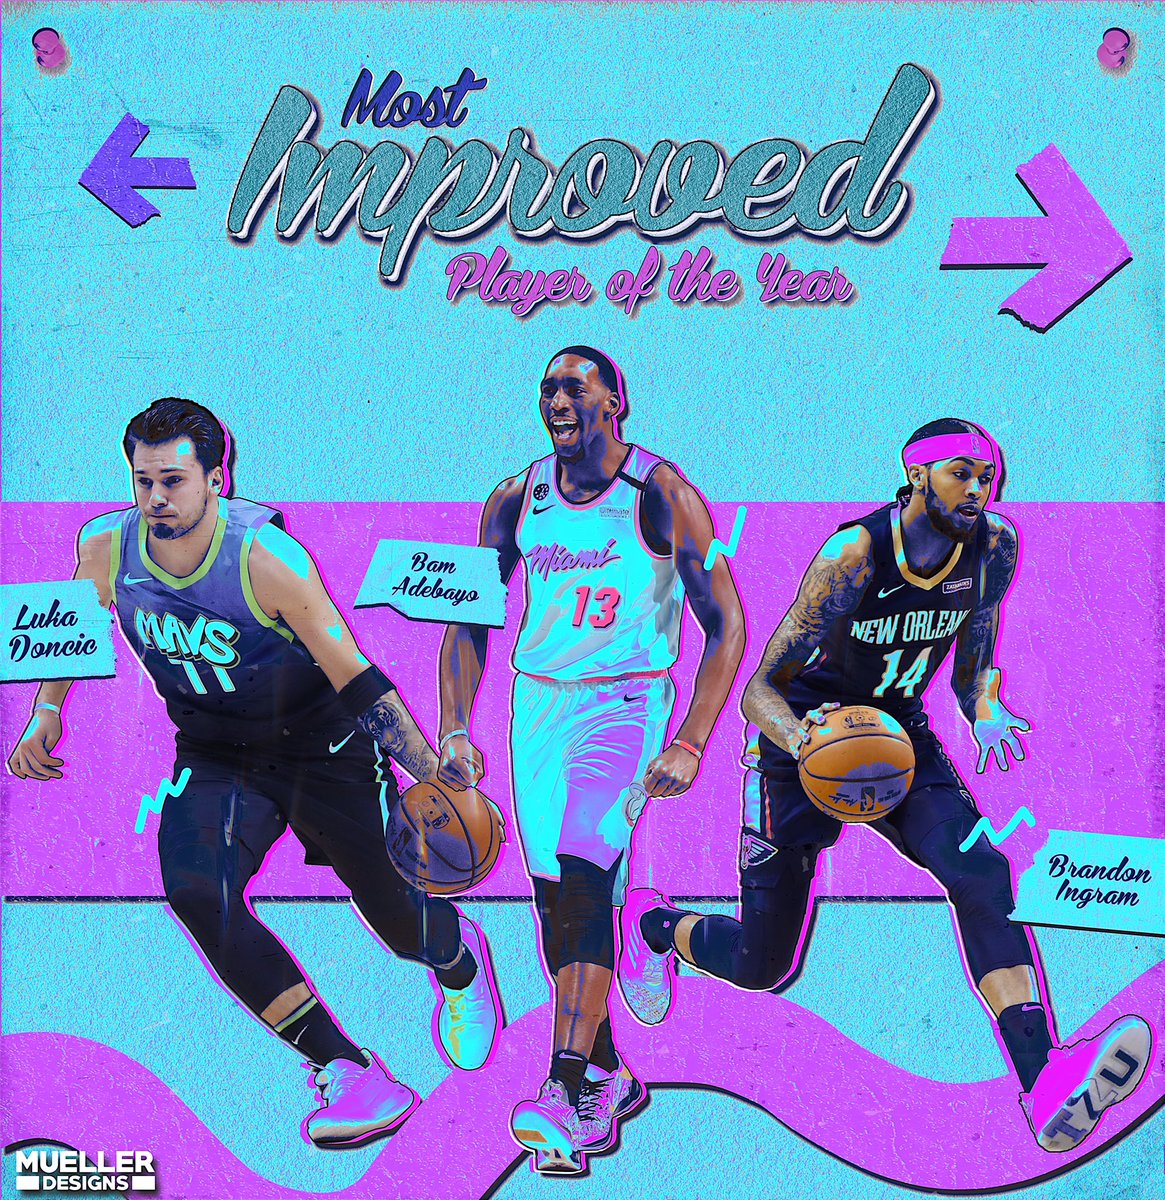 With the NBA season set to resume this year, who’s the front runner for the Most Improved Player of the Year? #NBA #MIP #MostImproved #MostImprovedPlayer #LukaDonic #BamAdebayo #BrandonIngram